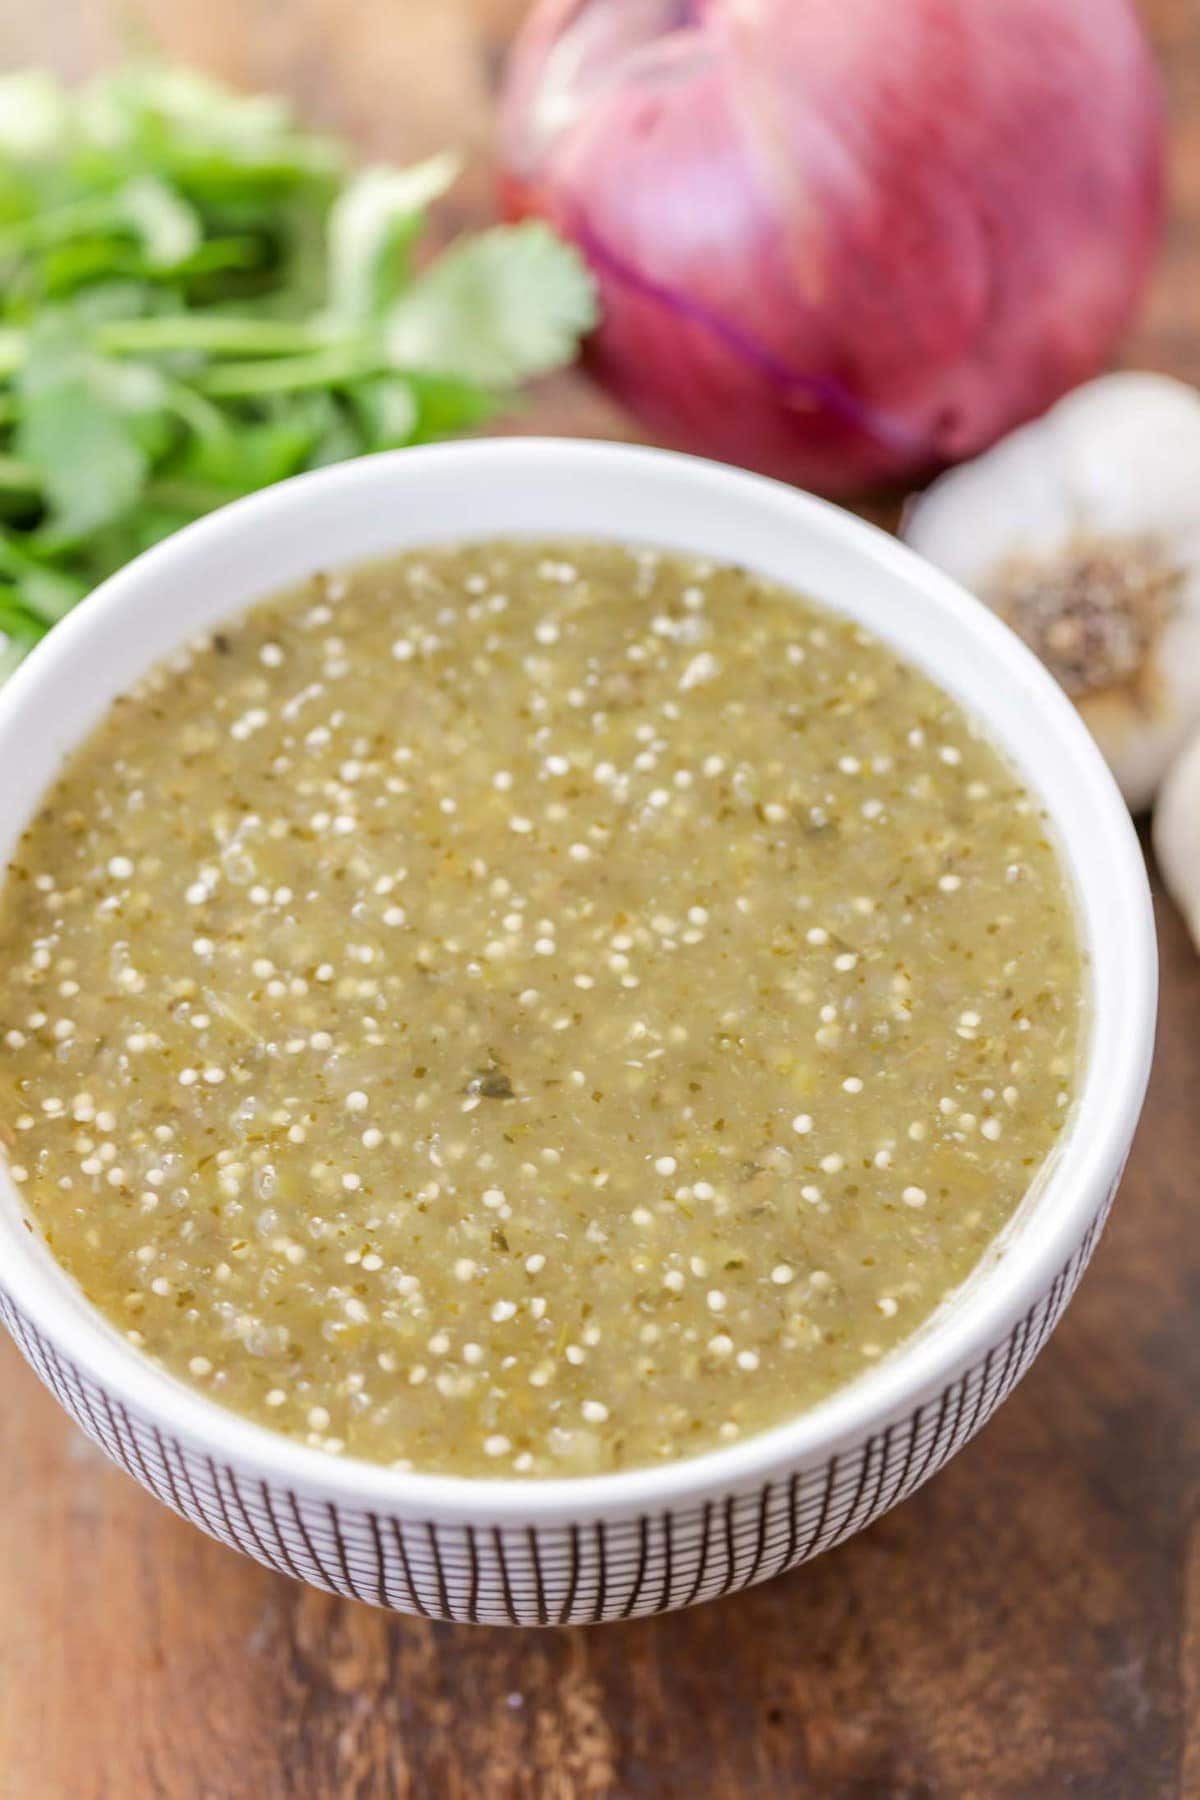 Tomatillo salsa stored in a bowl close up.